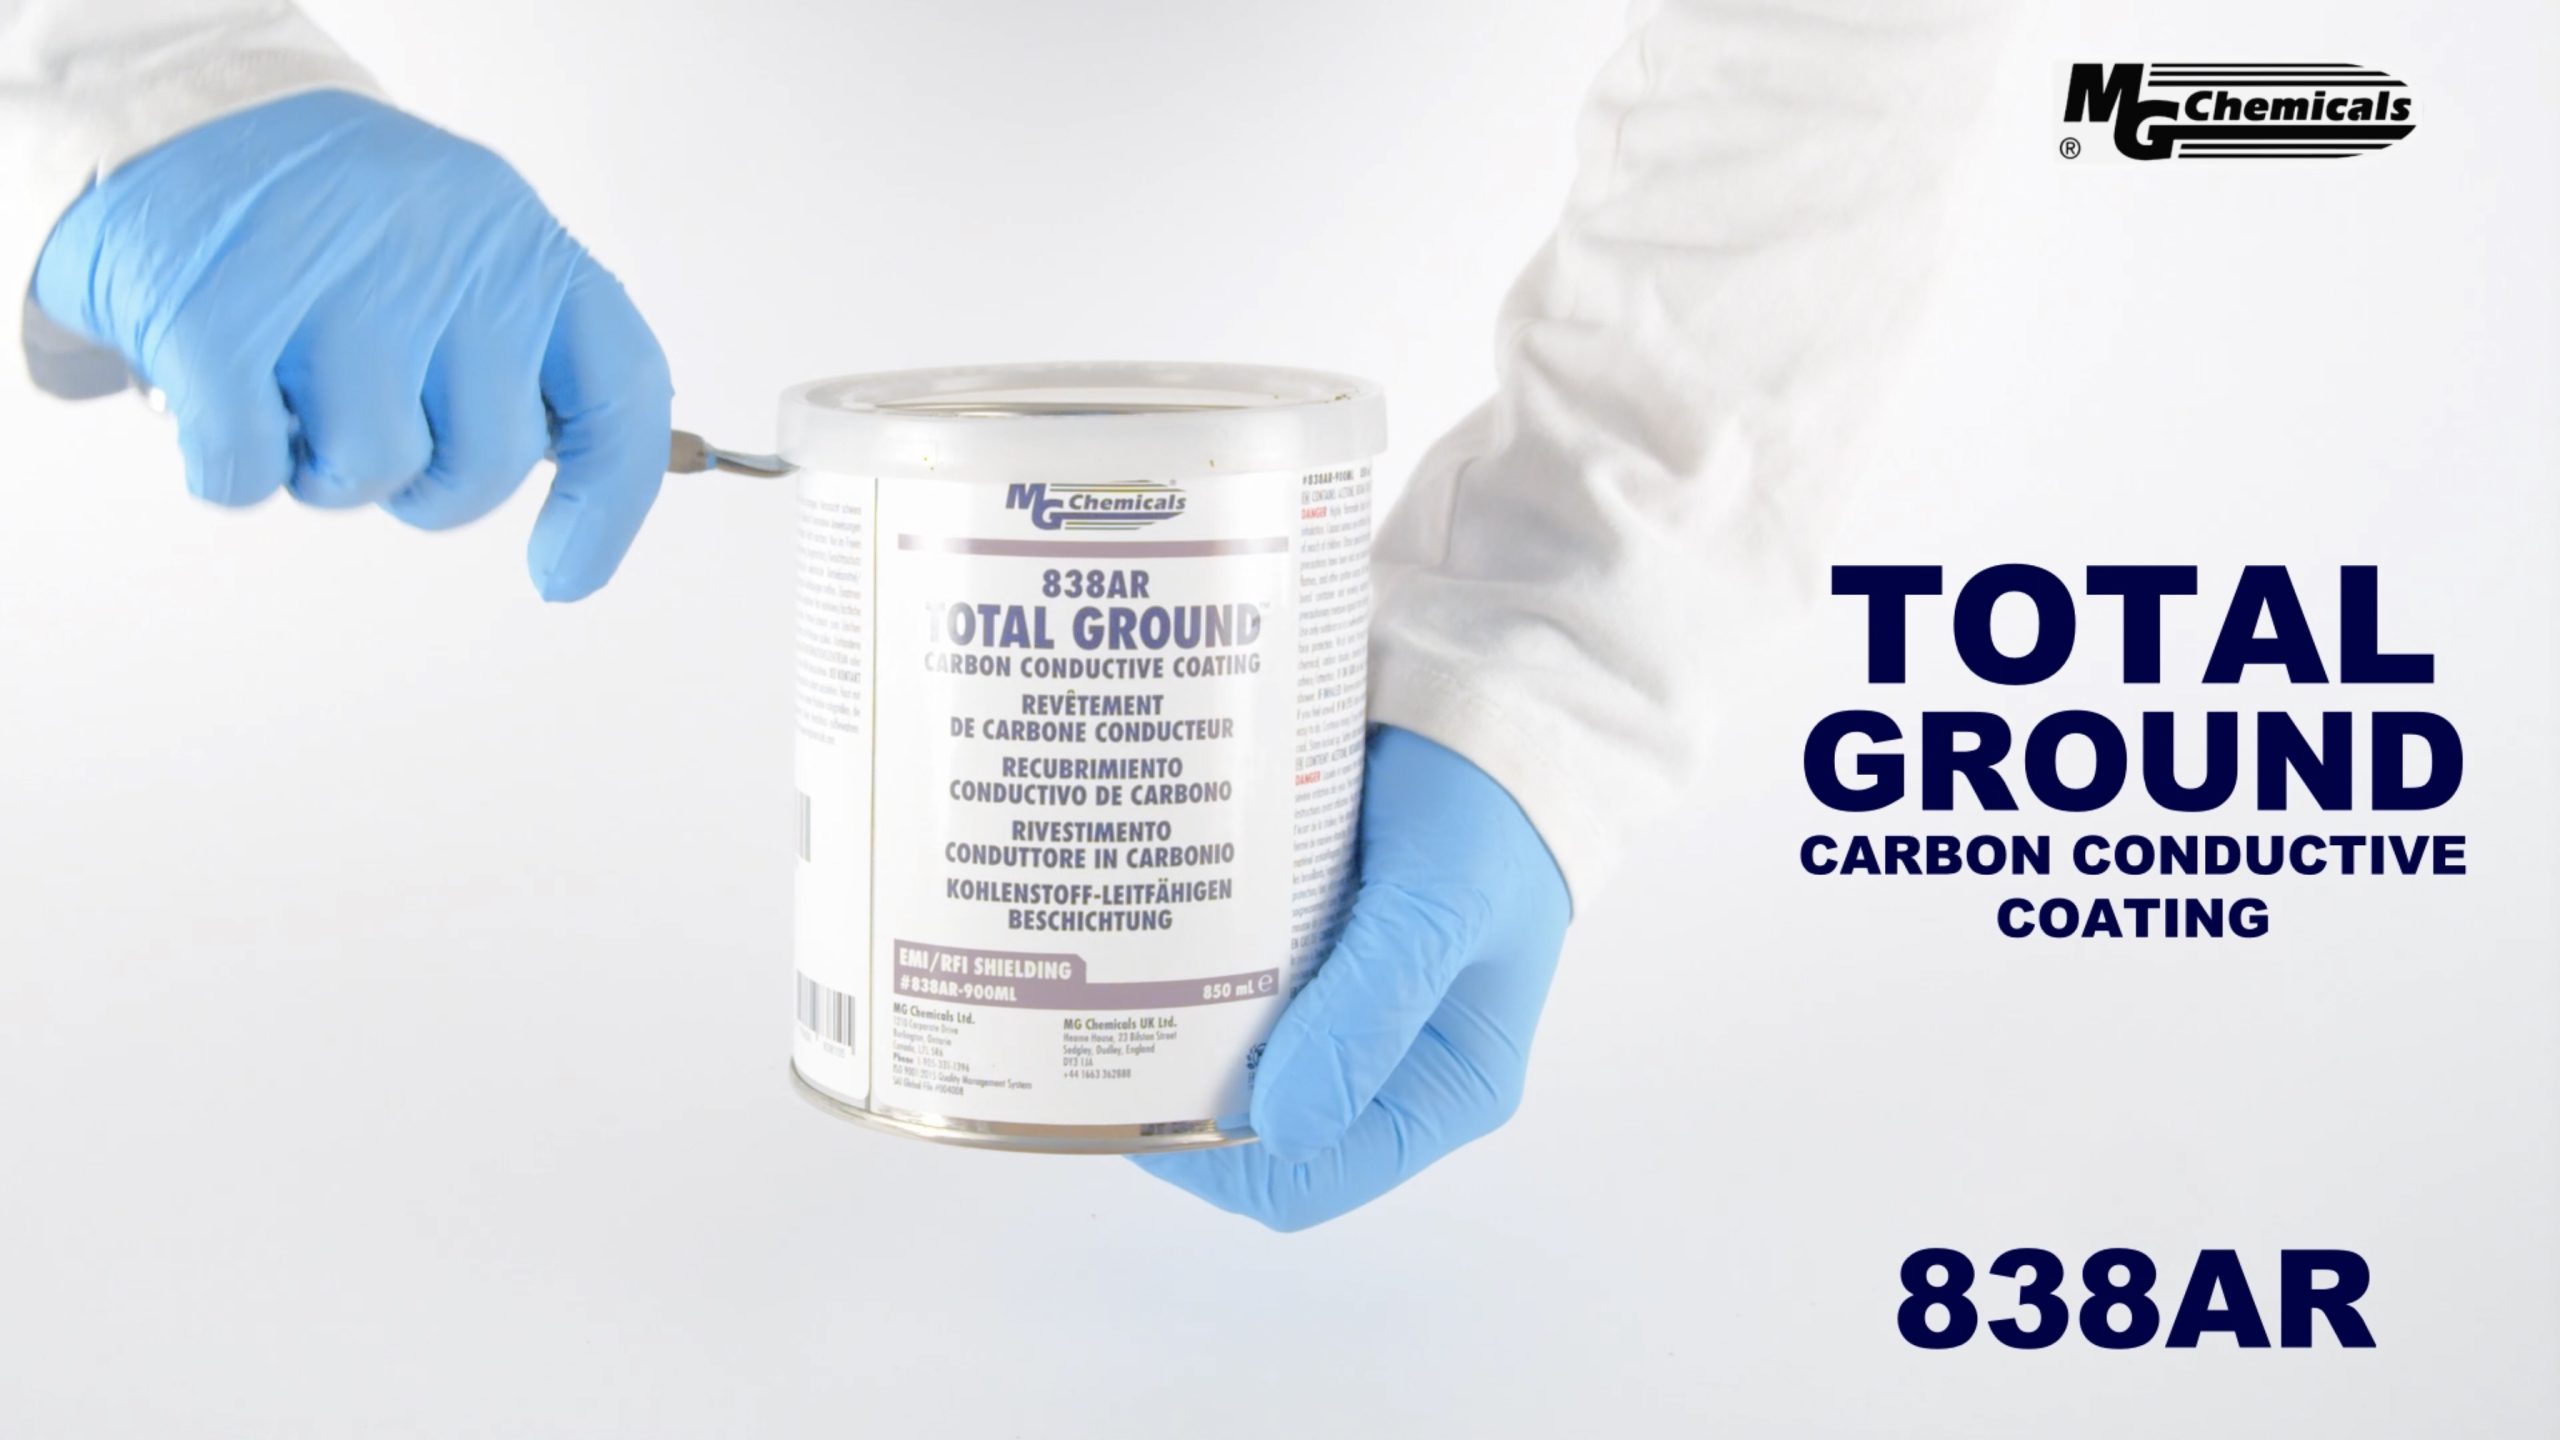 Total Ground Carbon Conductive Coating 838AR Unboxing